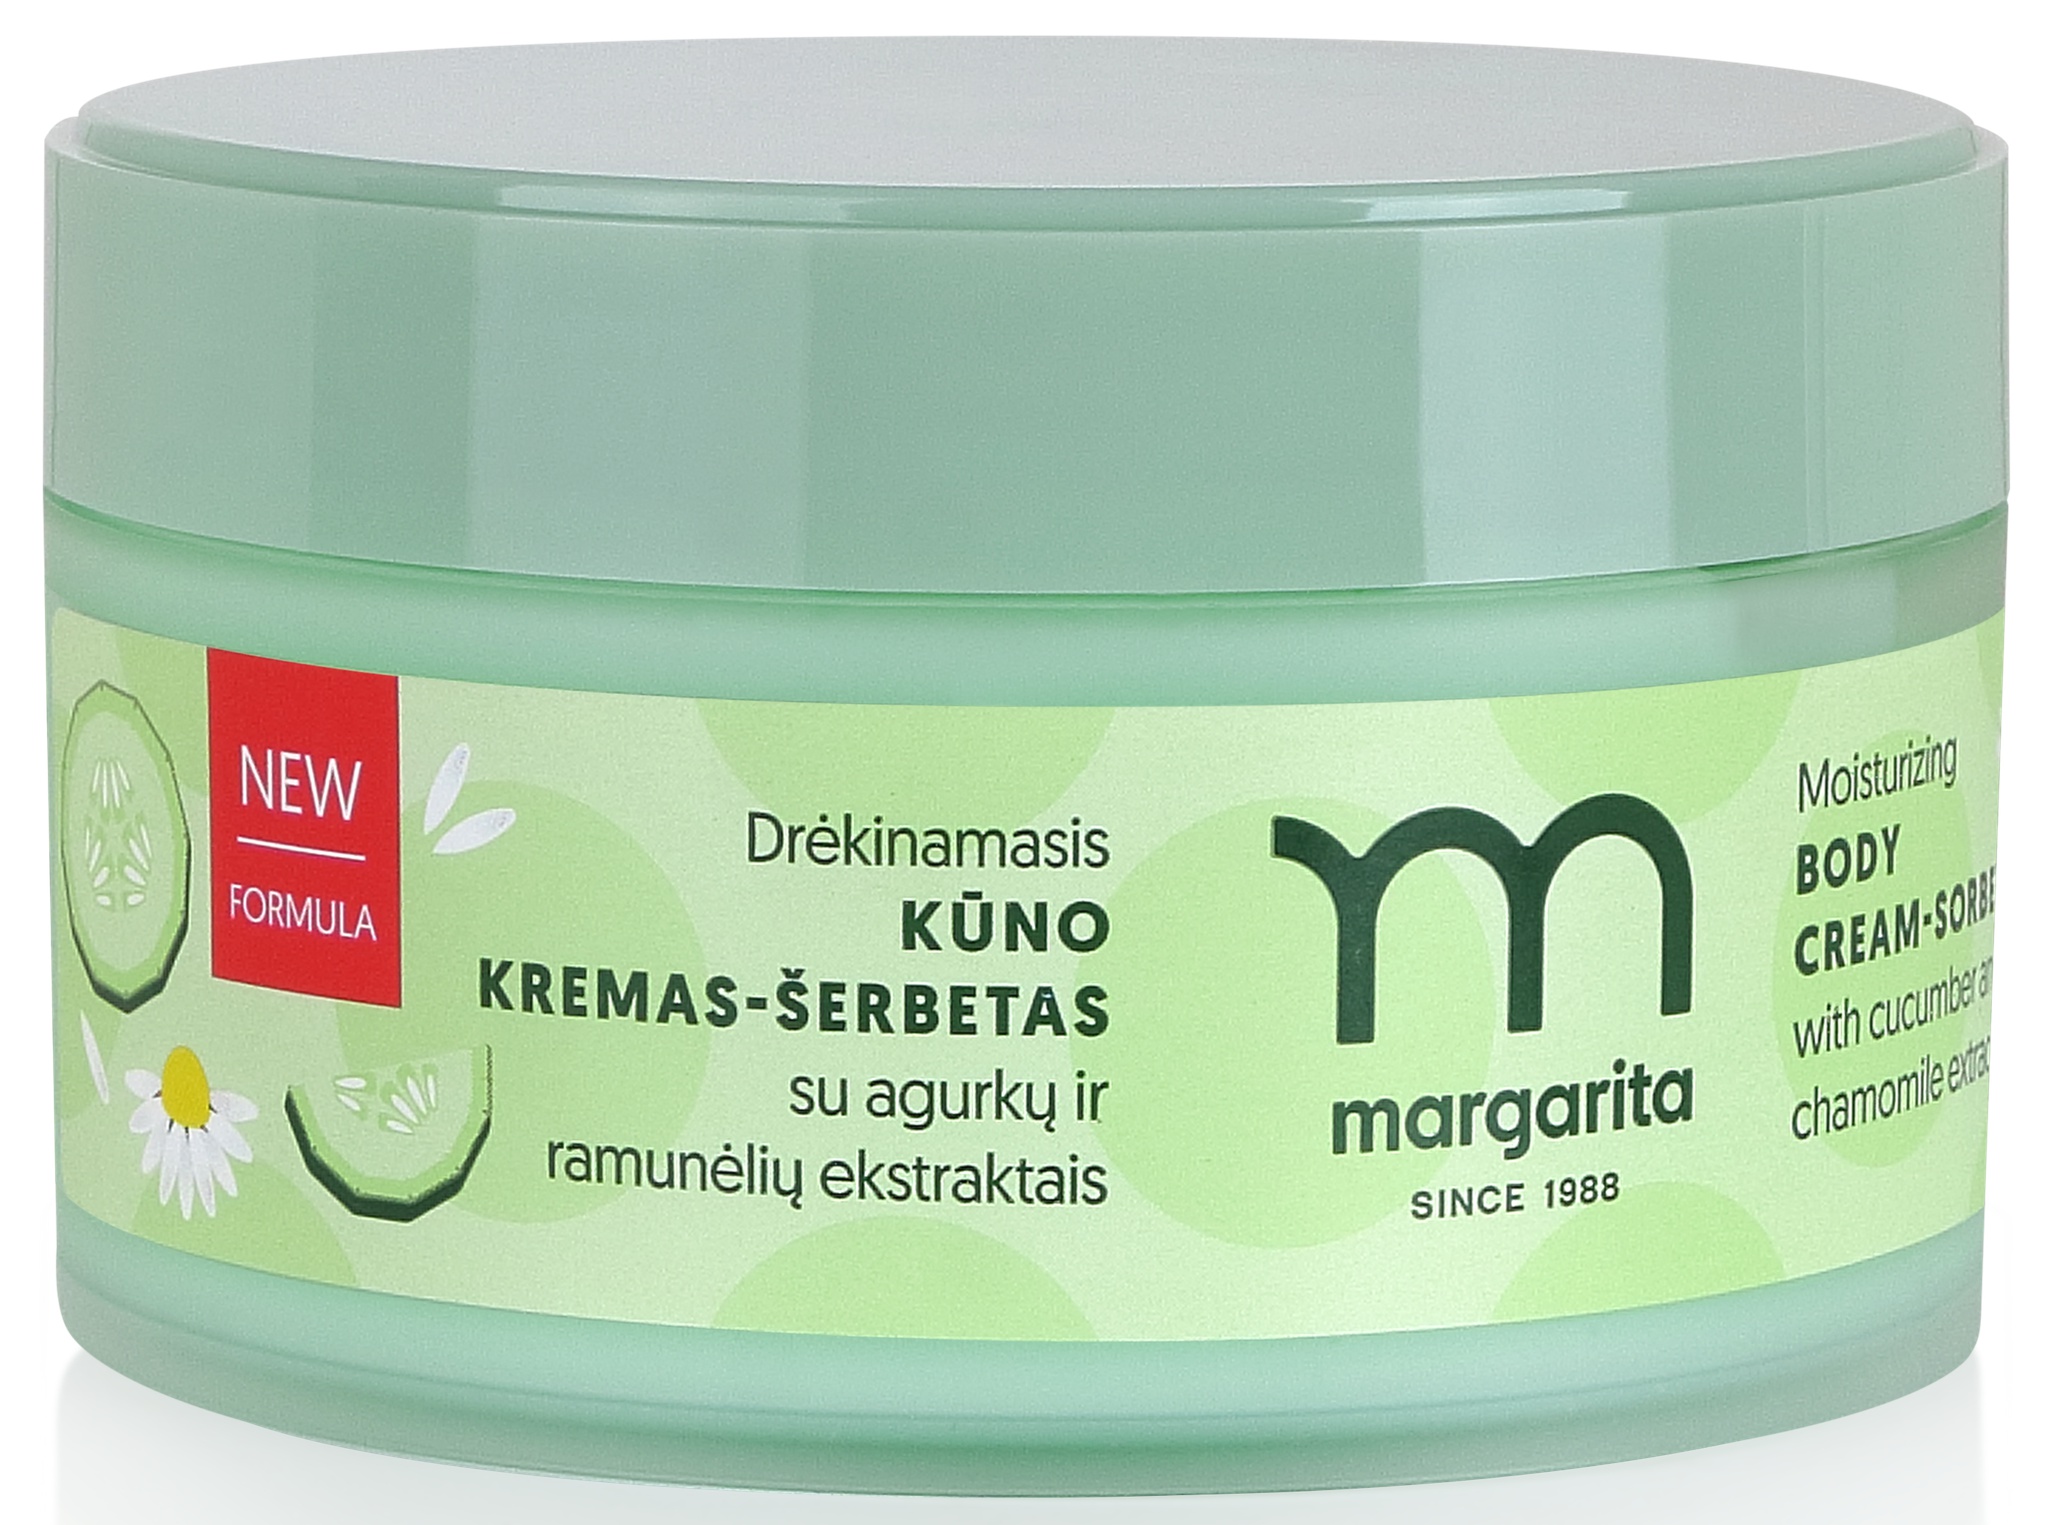 Margarita Moisturizing Body Cream-sorbet With Cucumber And Chamomile Extracts